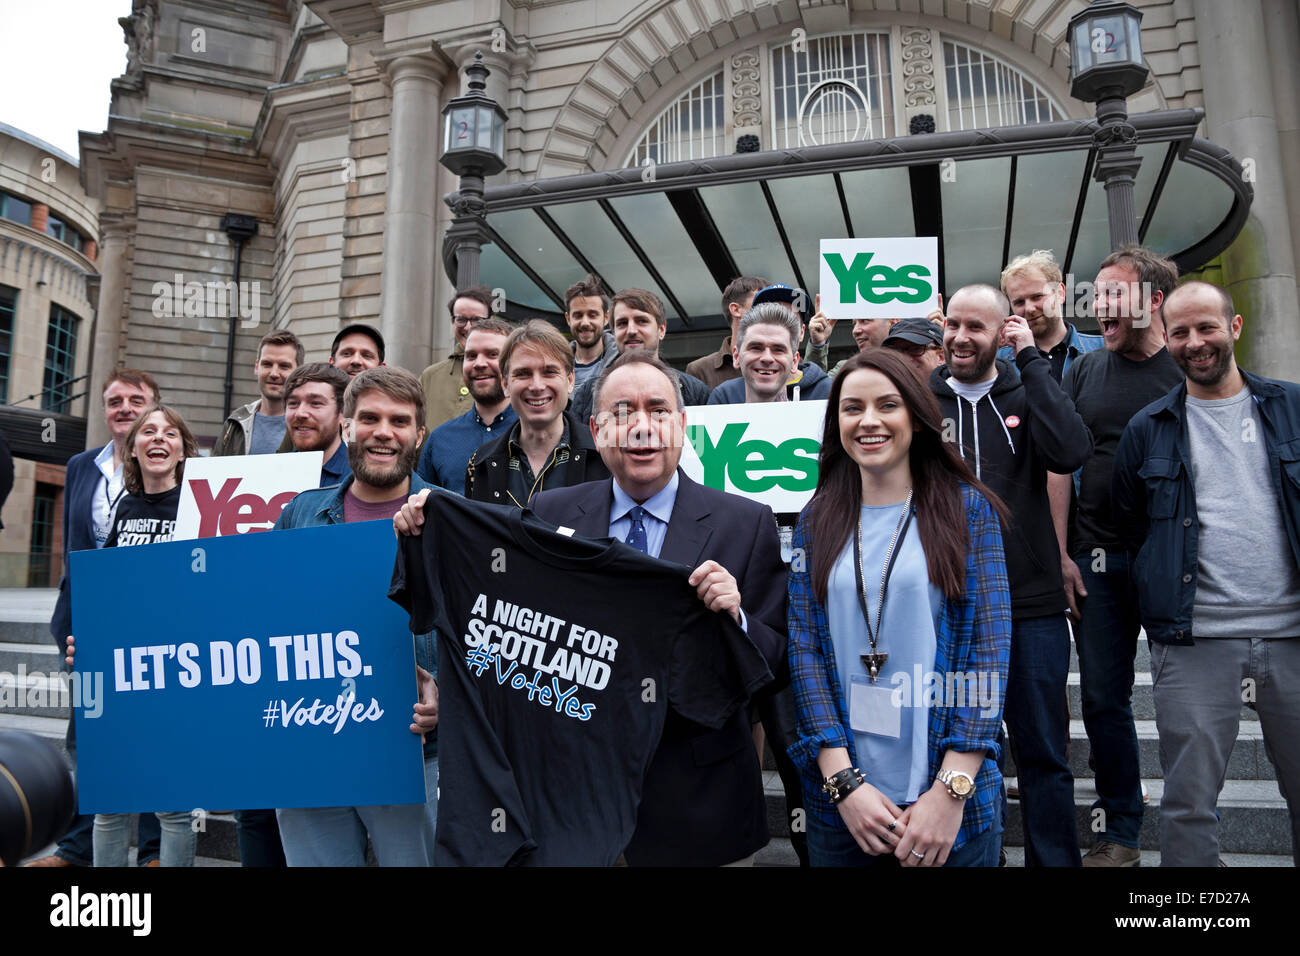 Edinburgh, Scotland. 14th September, 2014. Alex Salmond attends photocall with artists including members of Franz Ferdinand, Amy Macdonald and Mogwai who are due to perform at a sold-out concert this evening hosted by The Yes camp, the 'Night for Scotland' concert at Edinburgh’s Usher Hall. Stock Photo